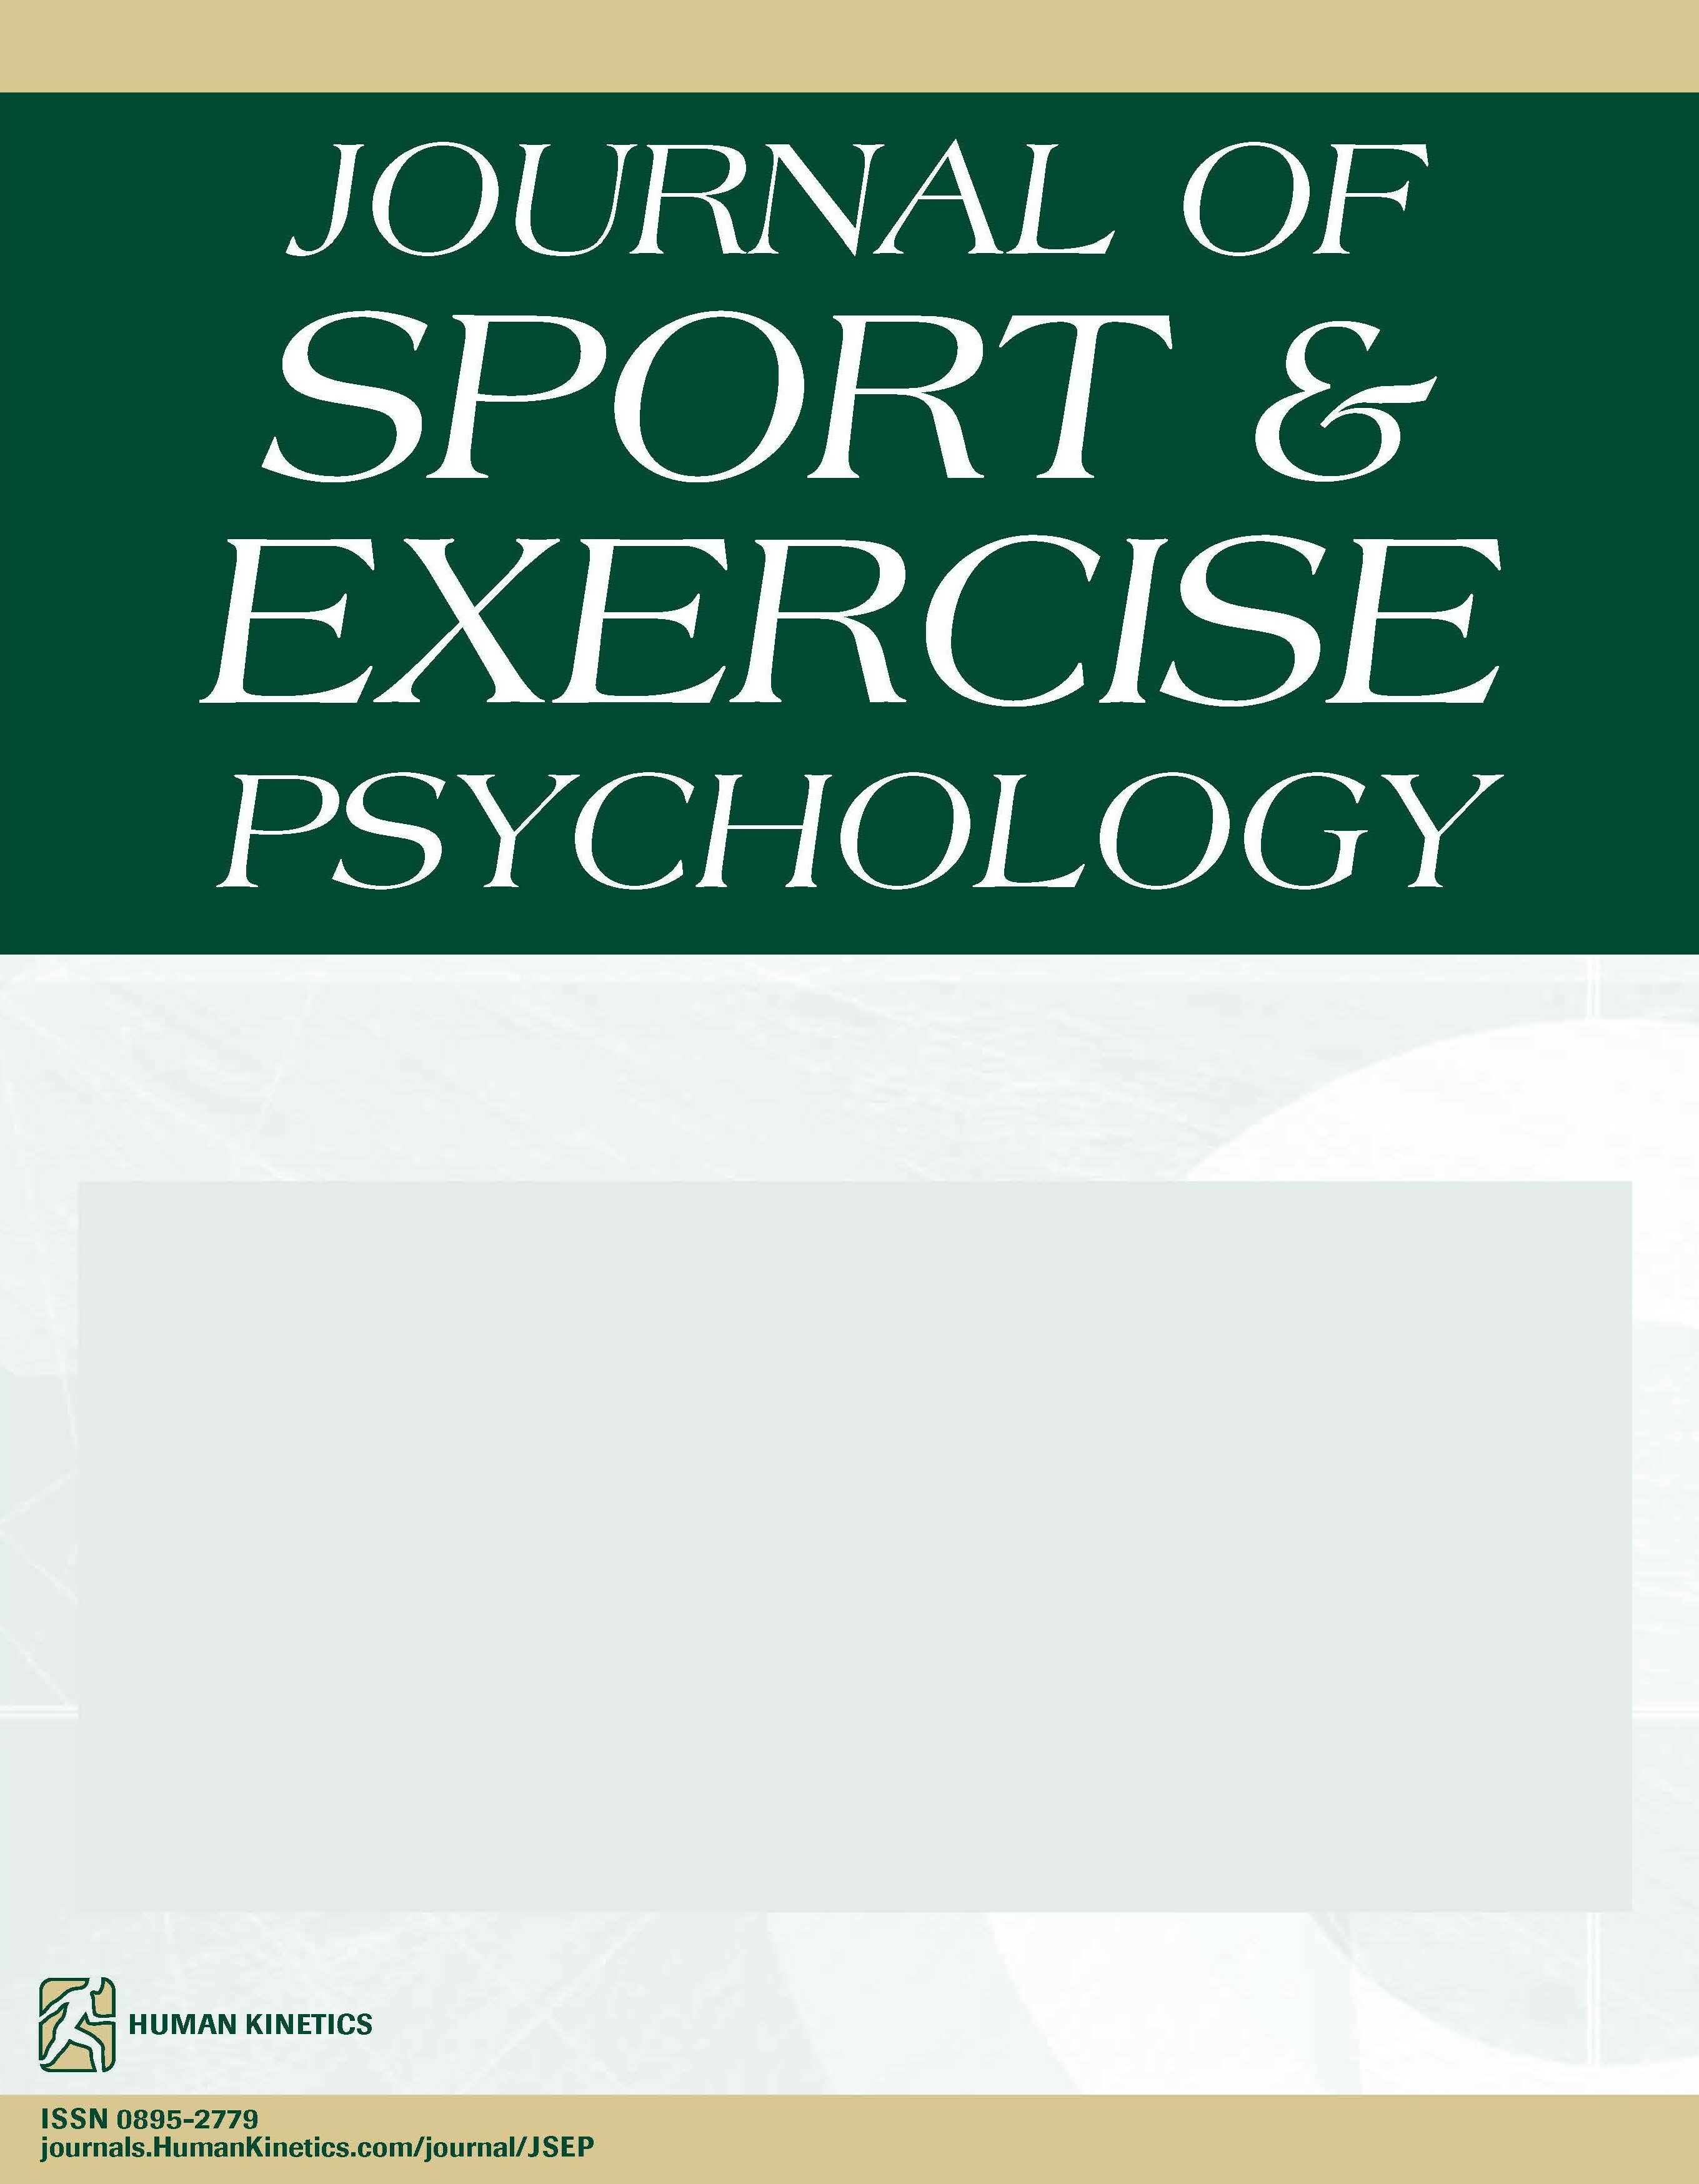 Psychological Aspects of Motocross Racing Considering Expected, Perceived, and Actual Performance